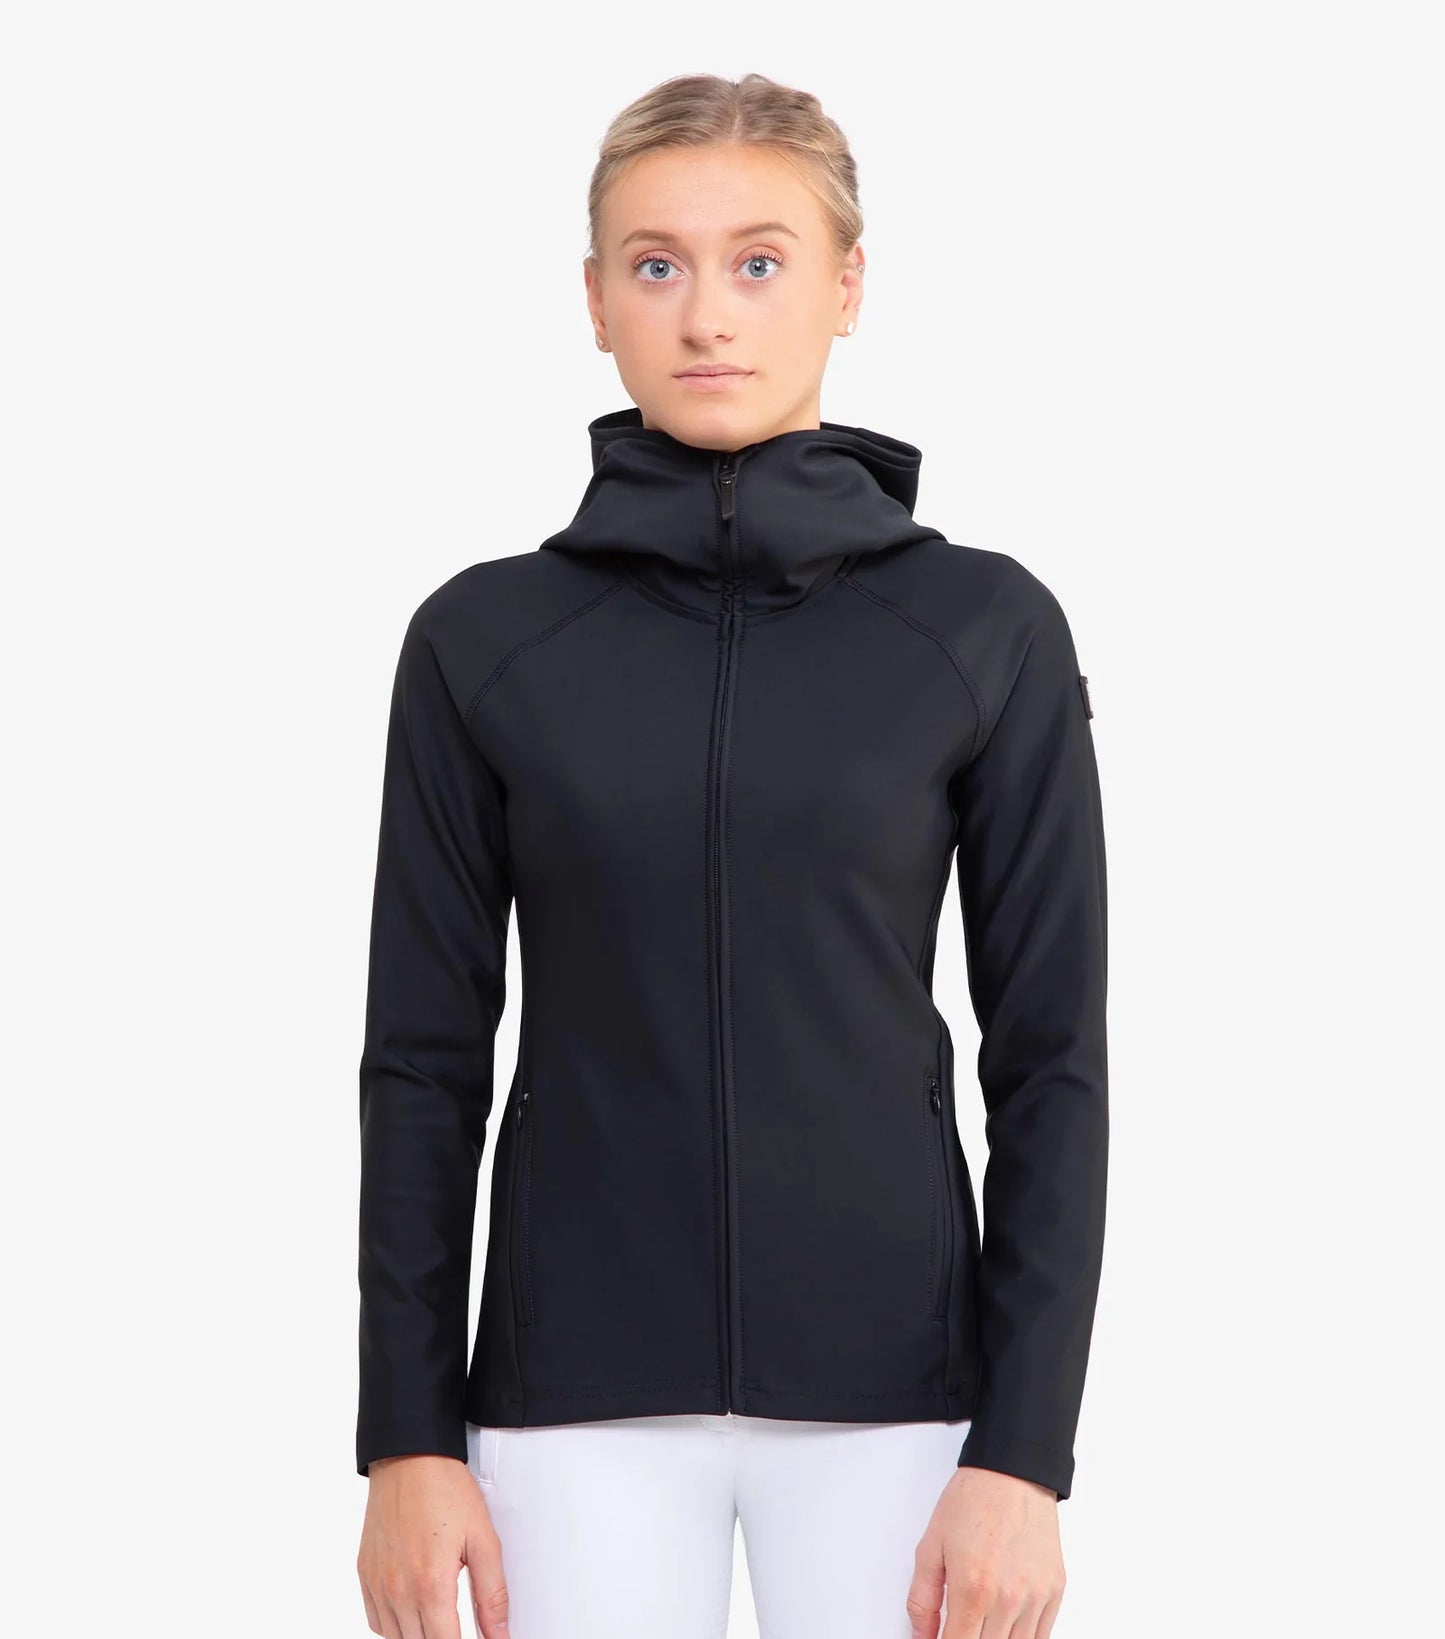 Premier Equine Destino Ladies Technical Hooded Riding Jacket